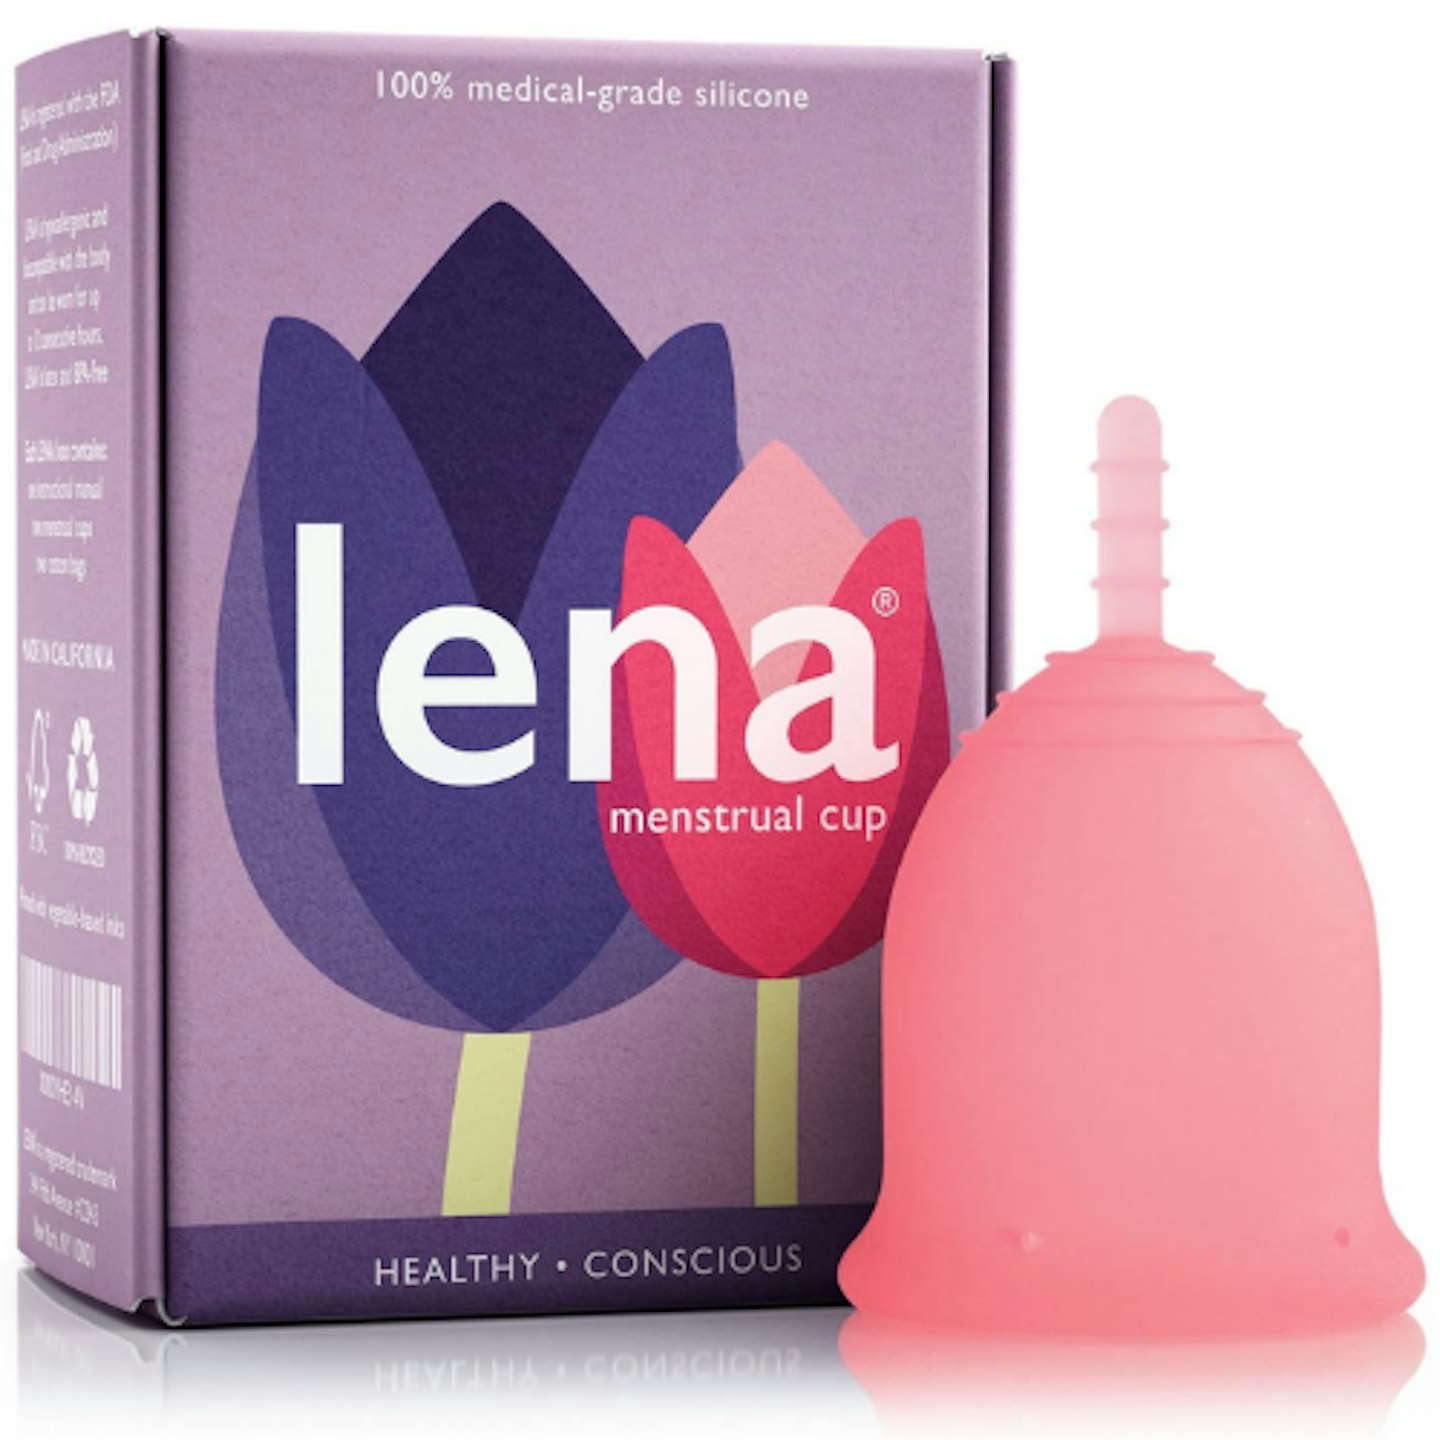 TOTM, Removing a menstrual cup: Are menstrual cups messy?